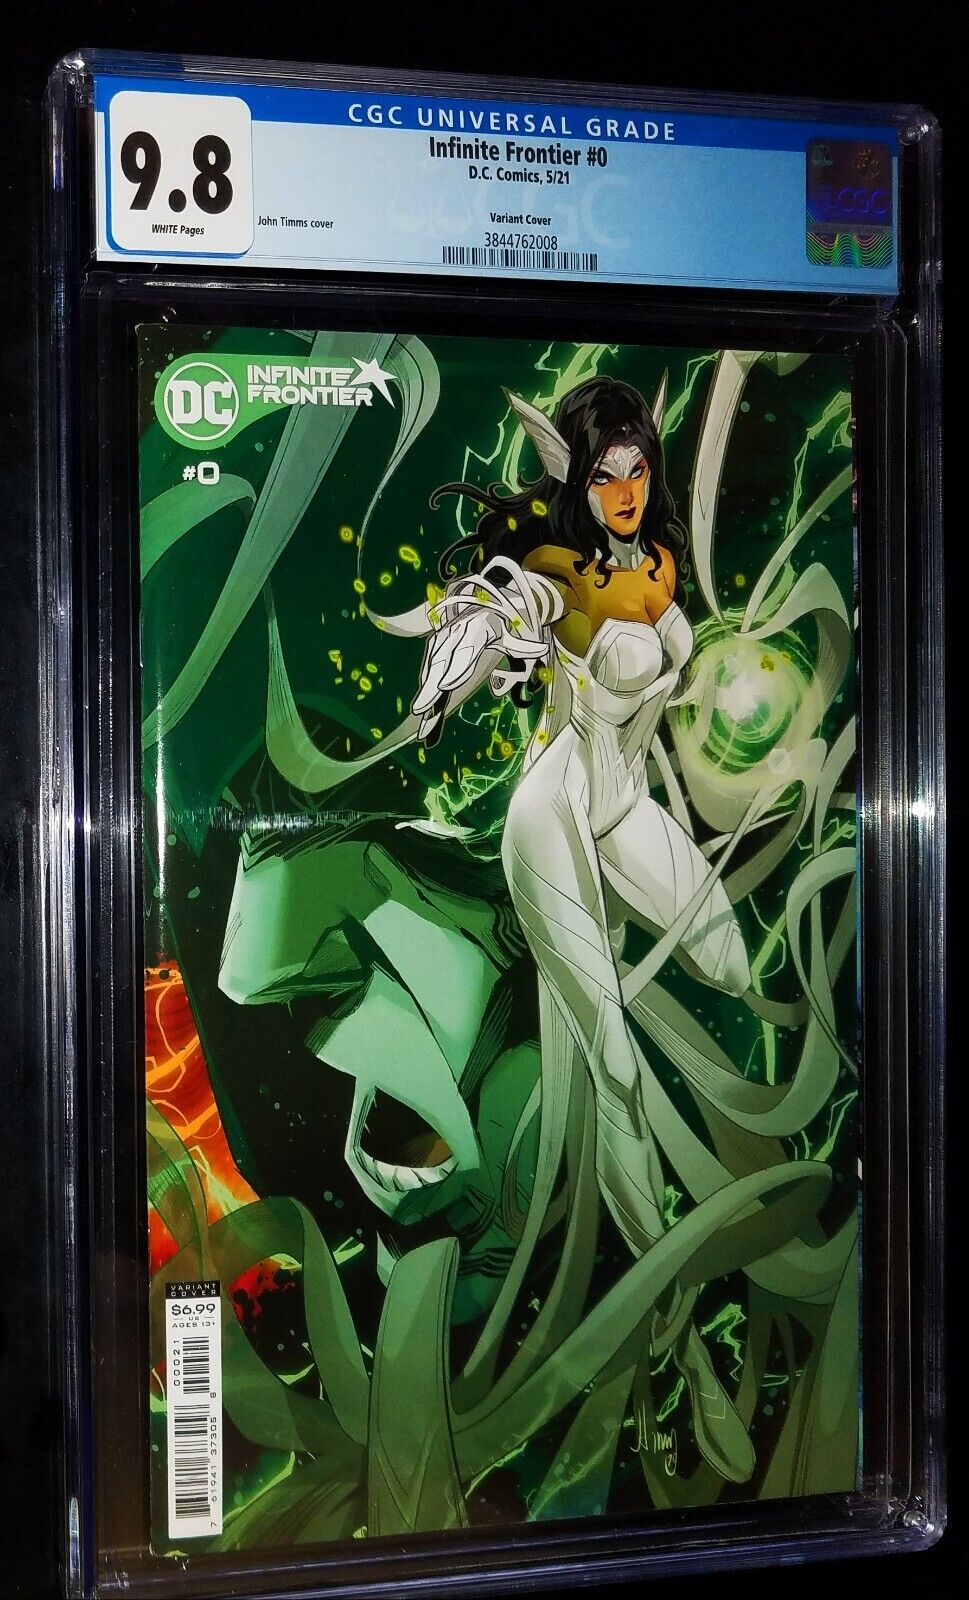 INFINITE FRONTIER #1 #0 TIMMS Timms Cover B Variant 2021 DC Comics CGC 9.8 NM/MT